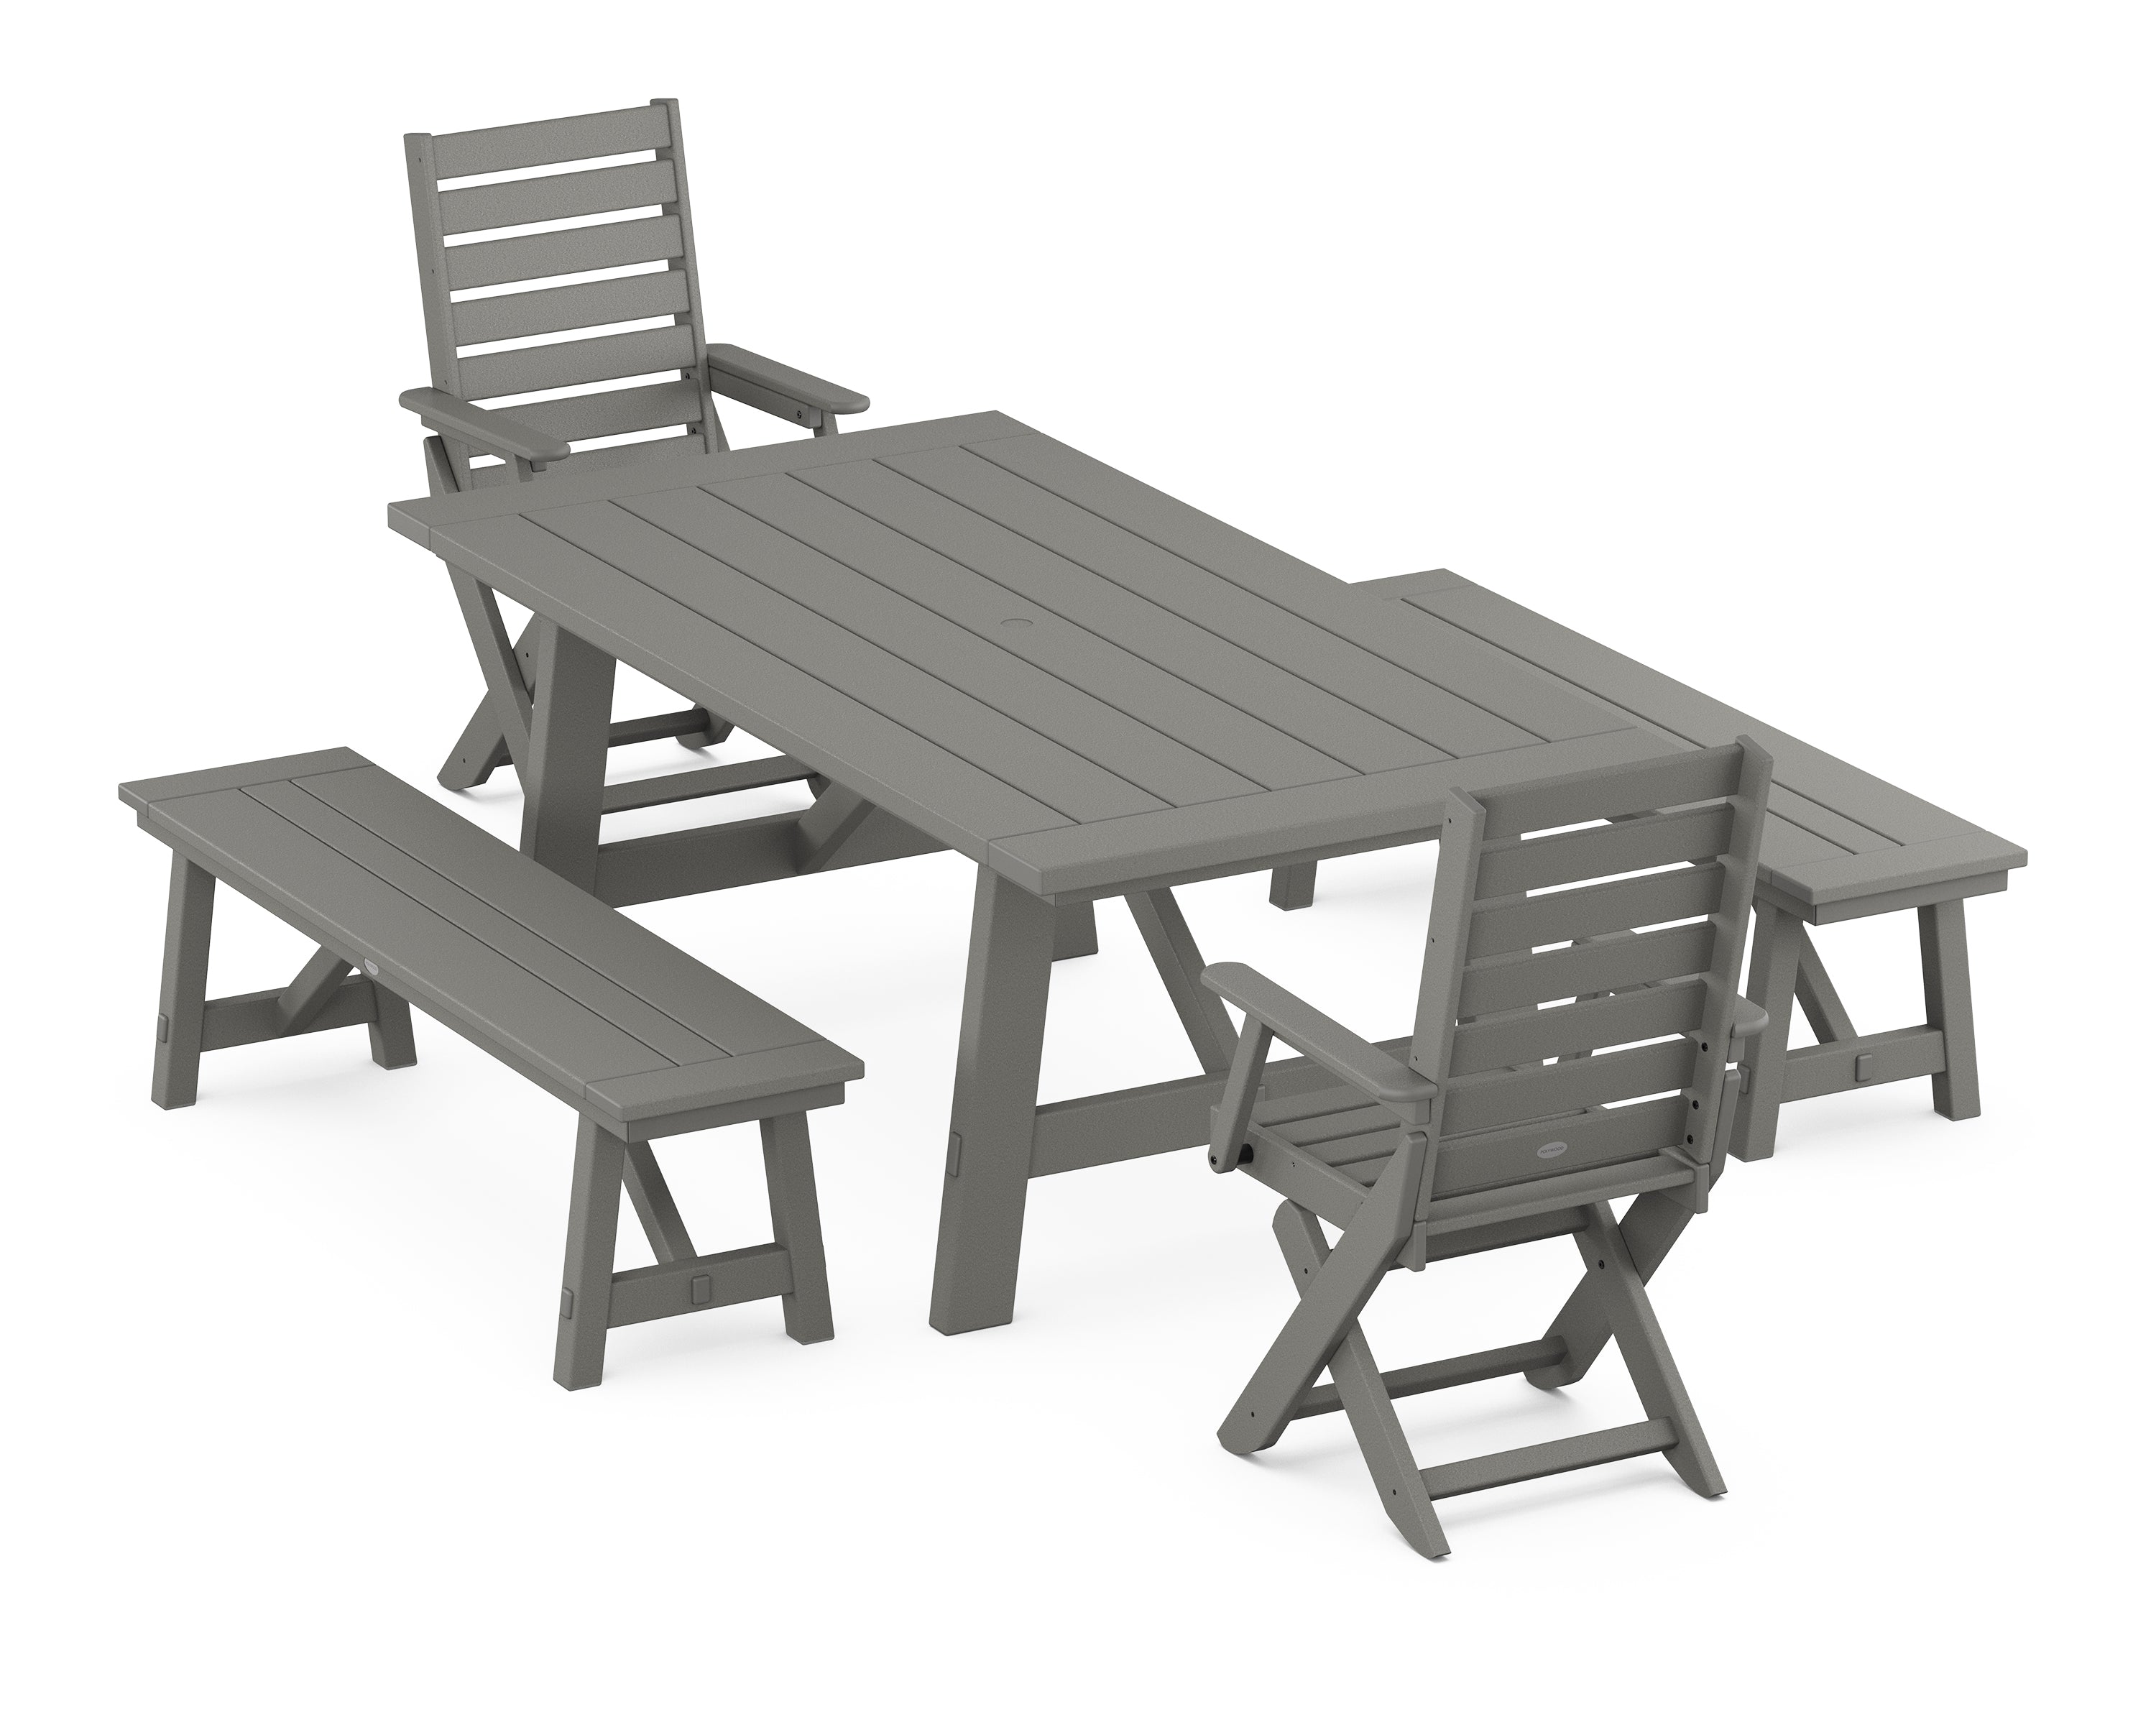 POLYWOOD® Captain Folding Chair 5-Piece Rustic Farmhouse Dining Set With Benches in Slate Grey